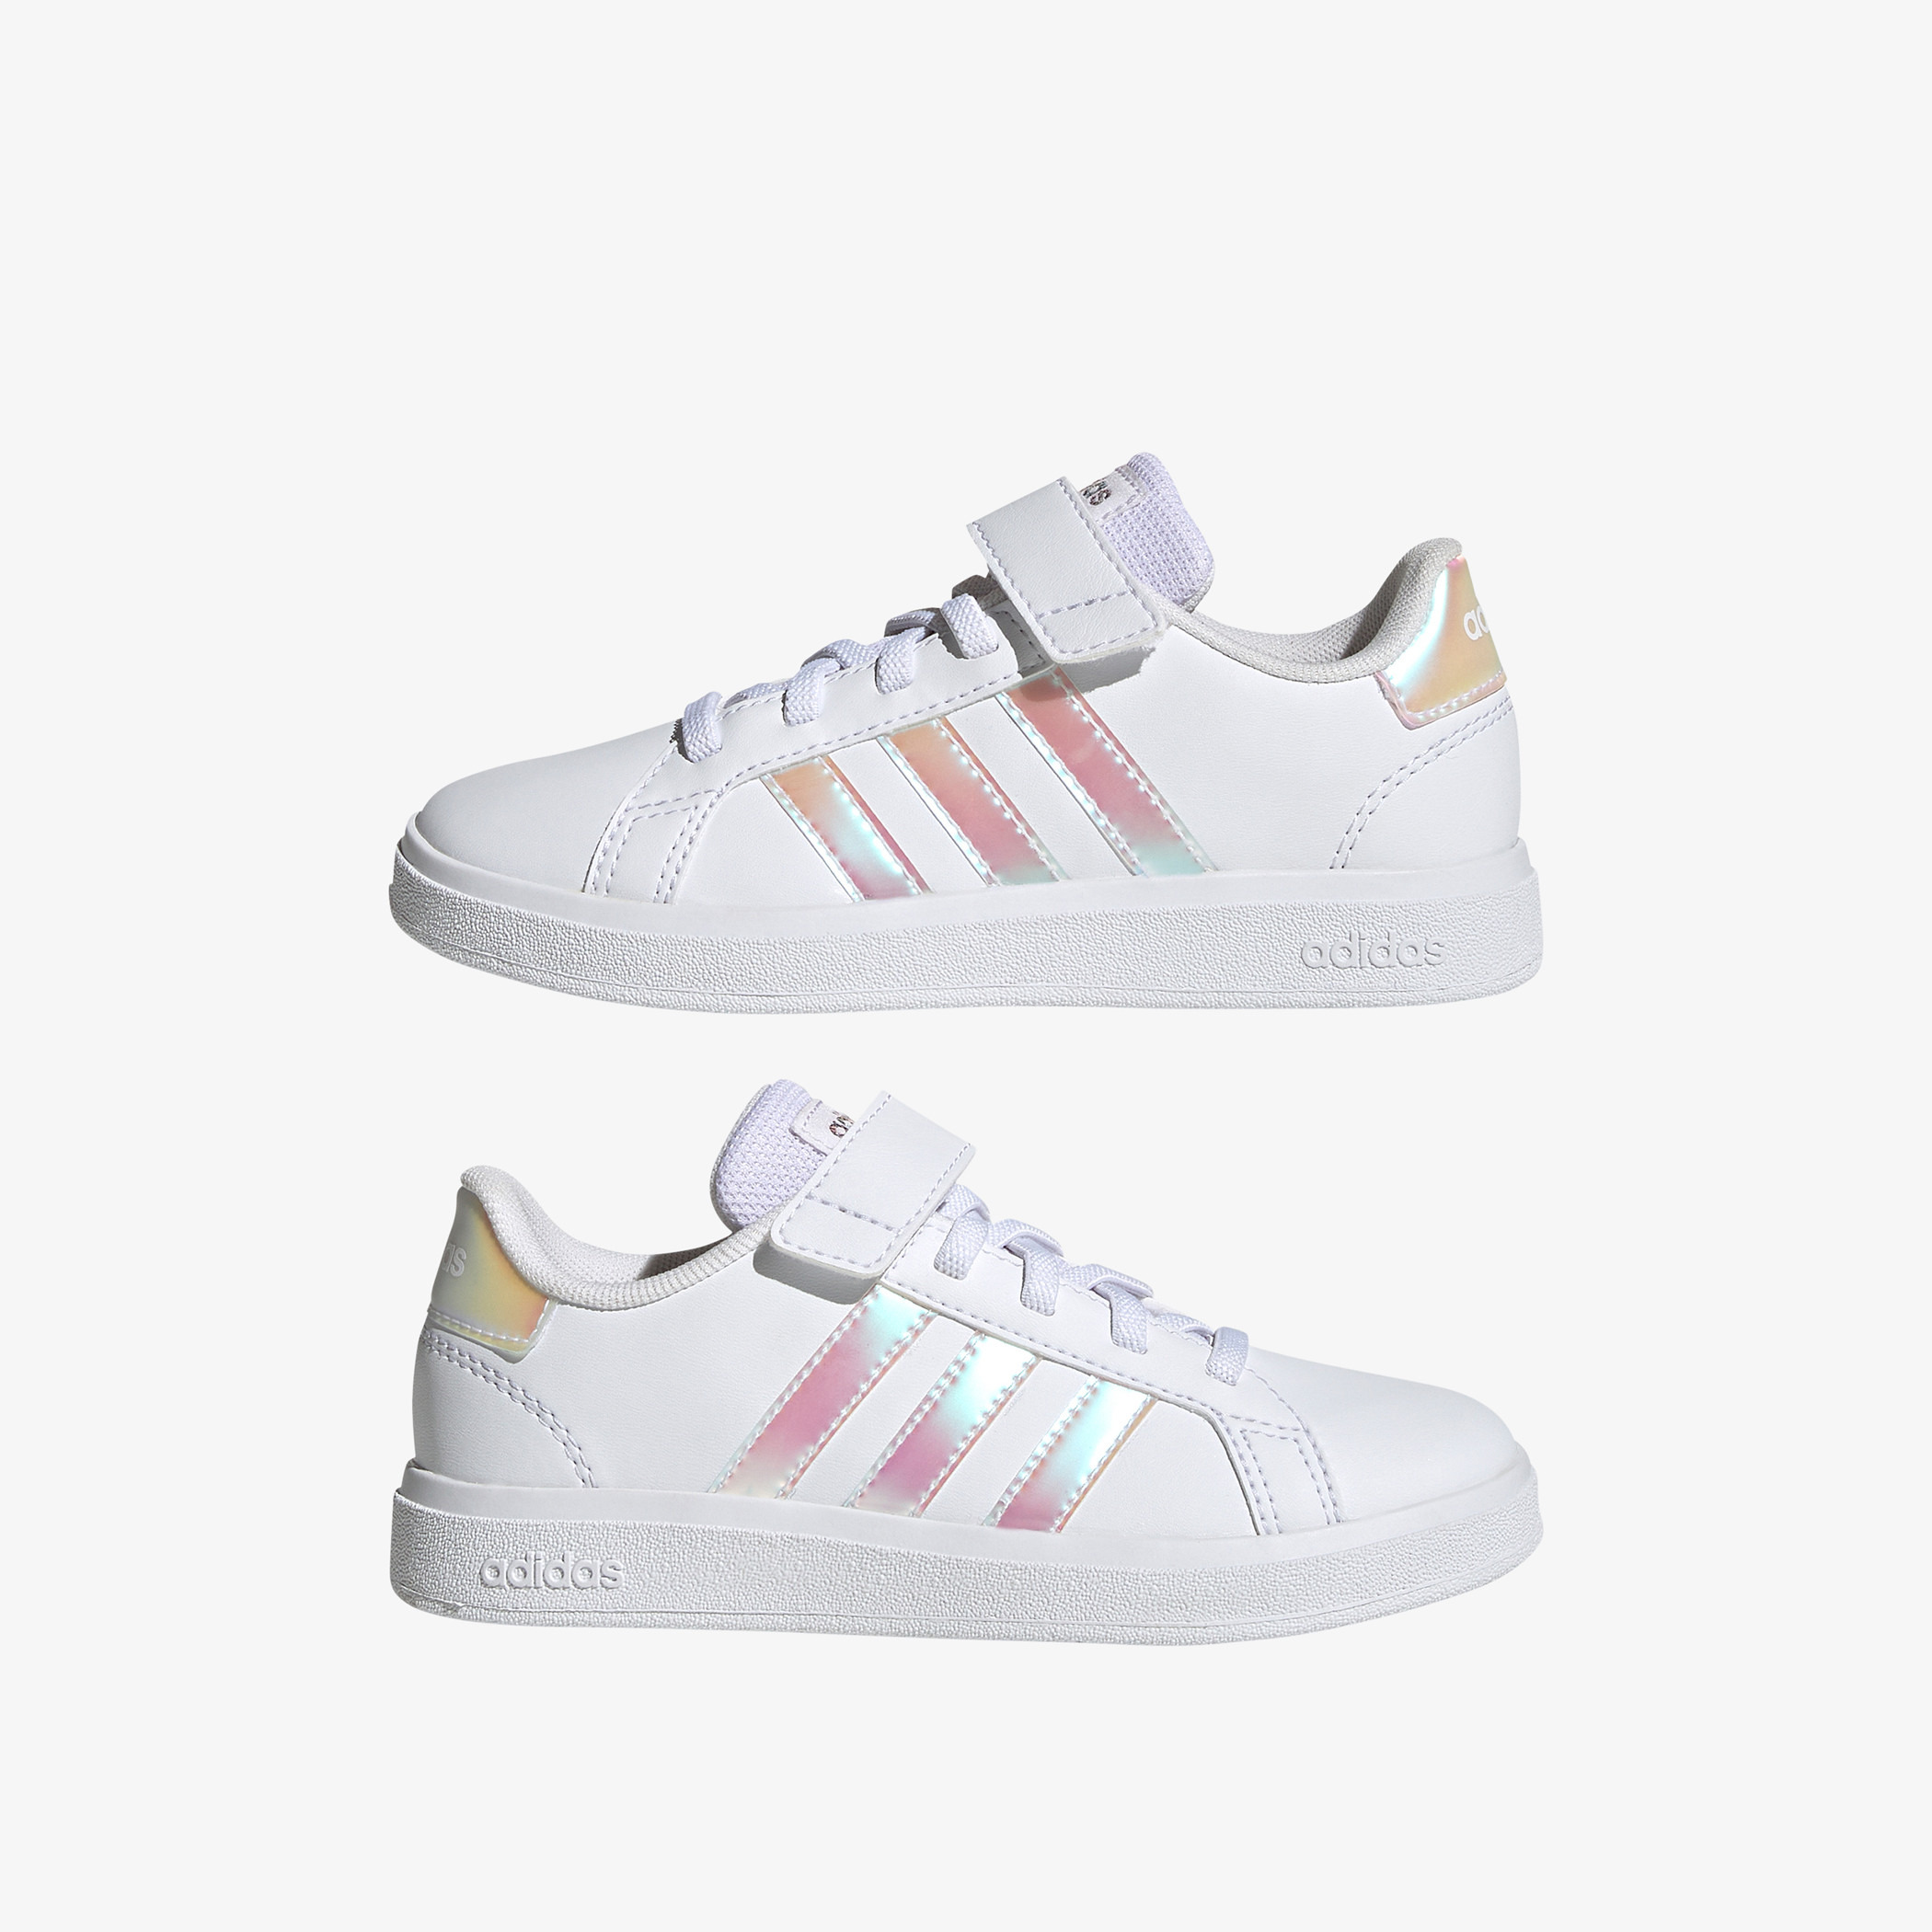 Shop Adidas Girls' Sneakers with Hook and Loop Closure - GRAND 